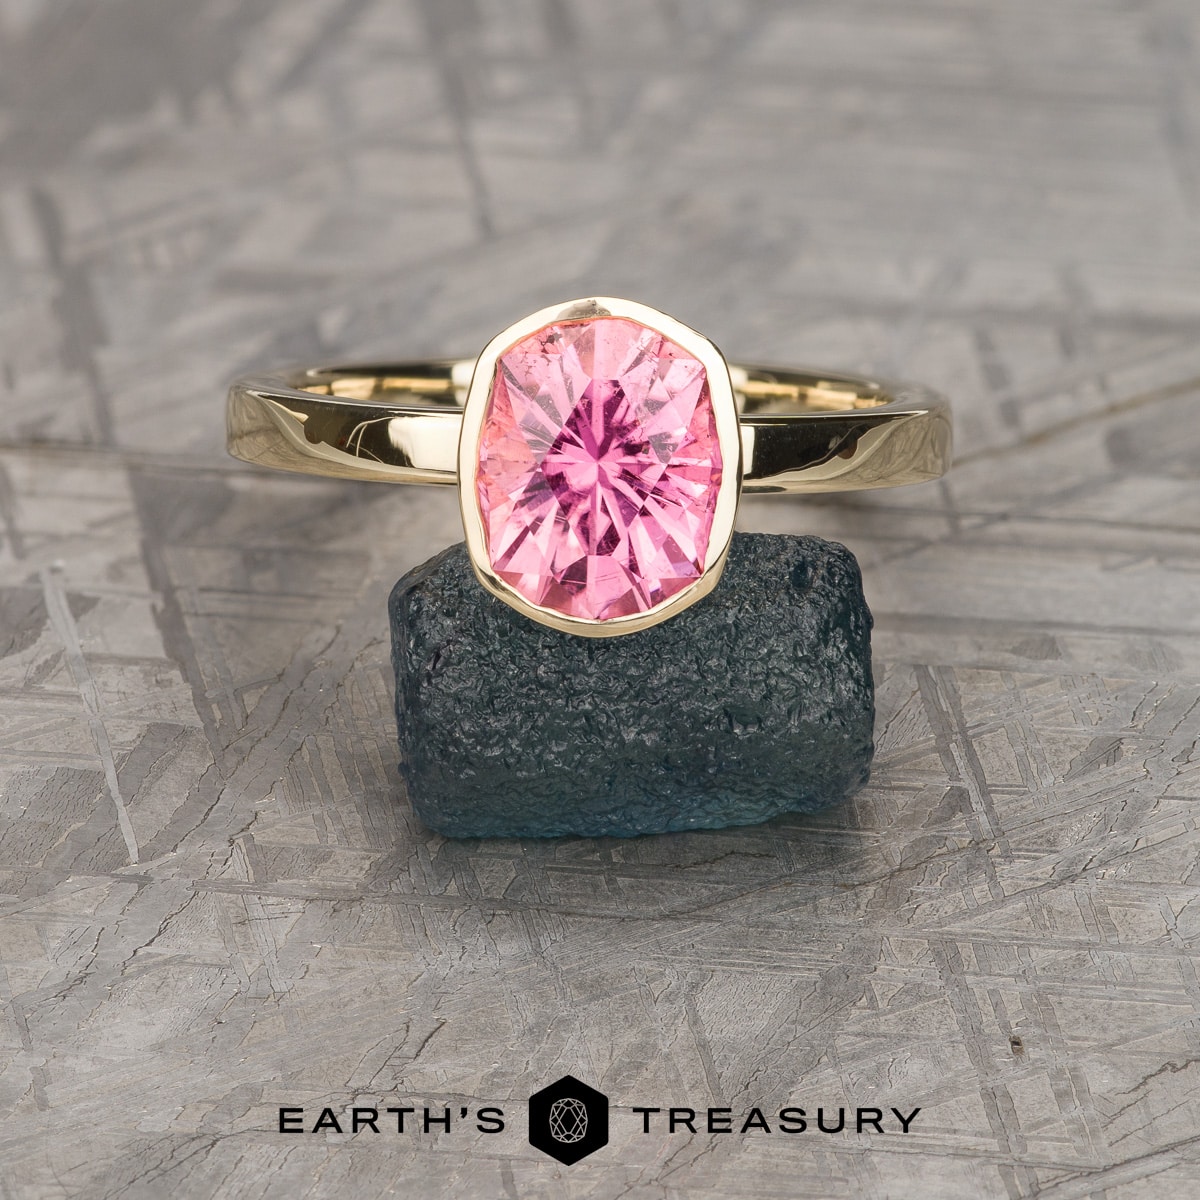 The "Emma" in 14k yellow gold with 2.02-carat California Tourmaline